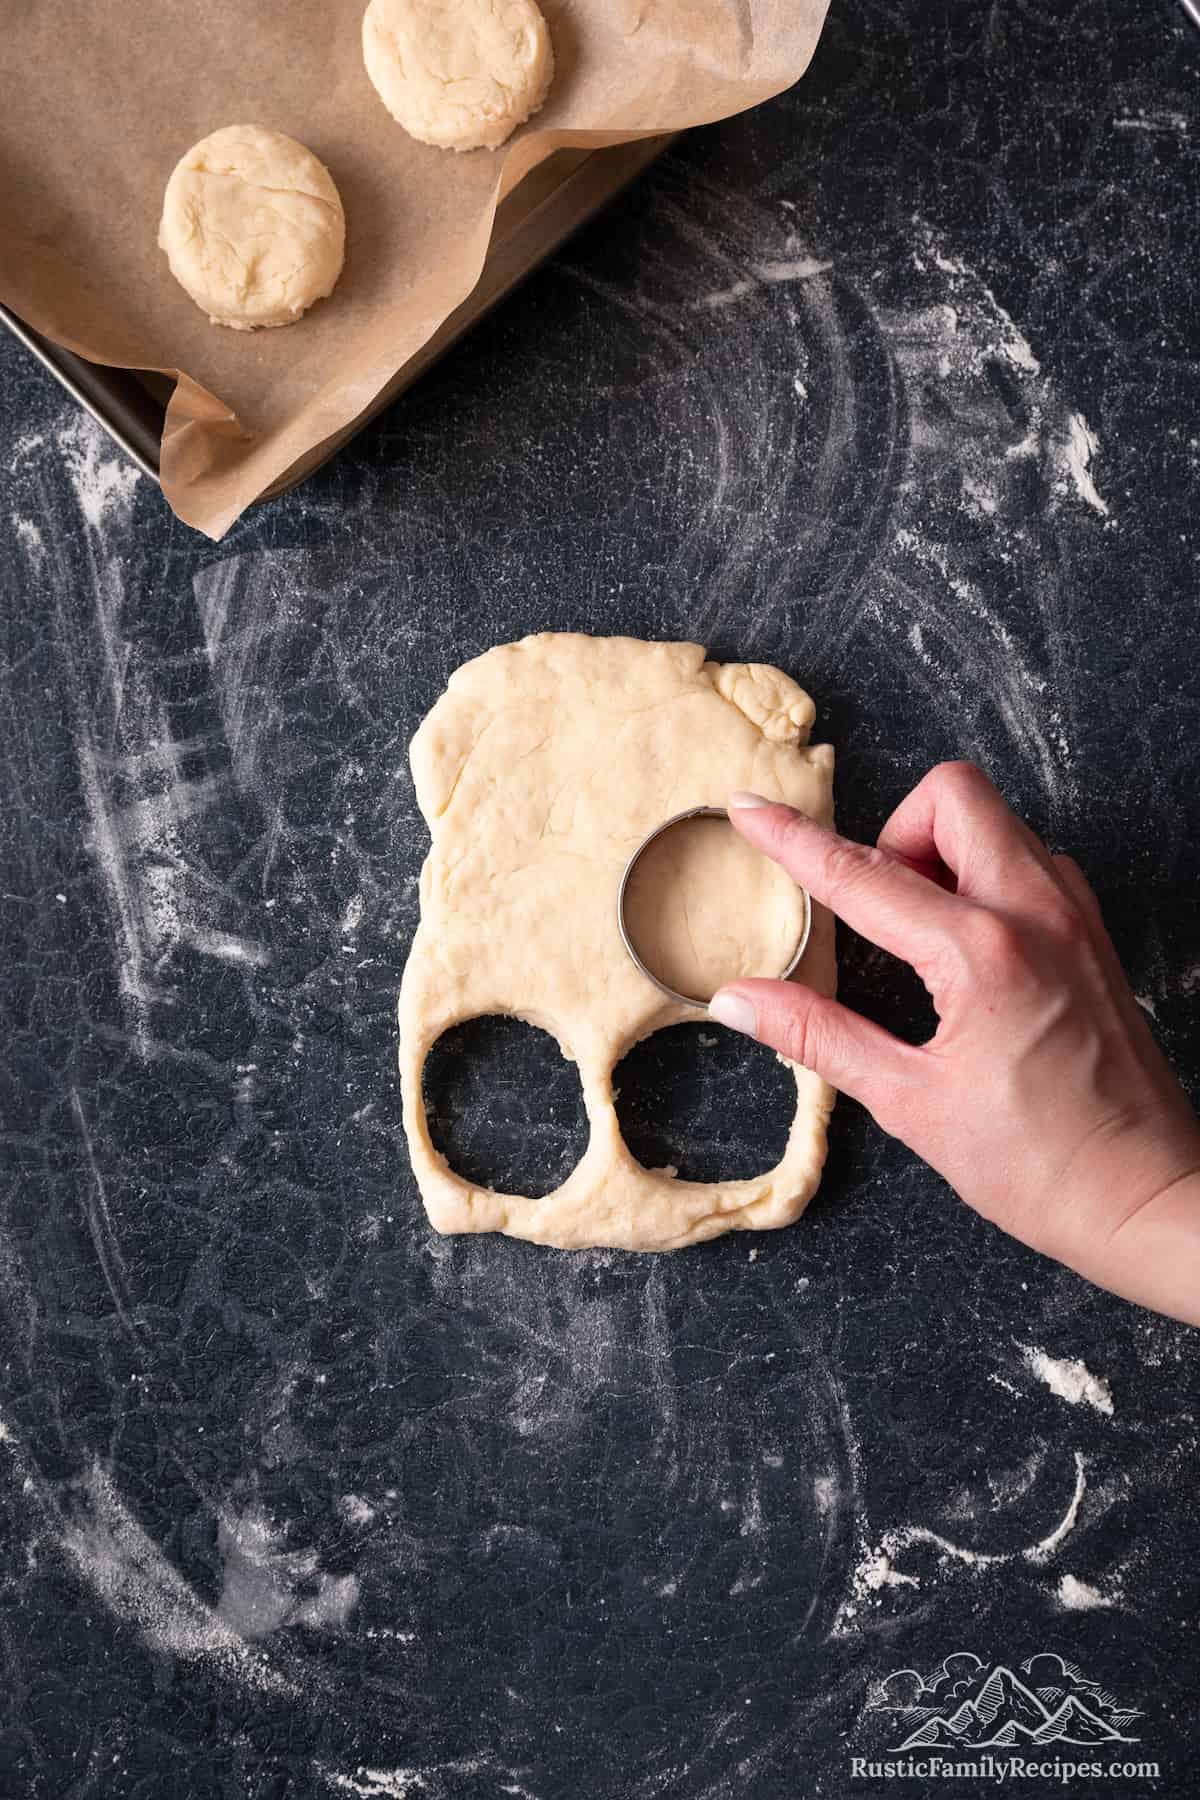 A hand used a cookie cutter to cut circular biscuits from the dough.